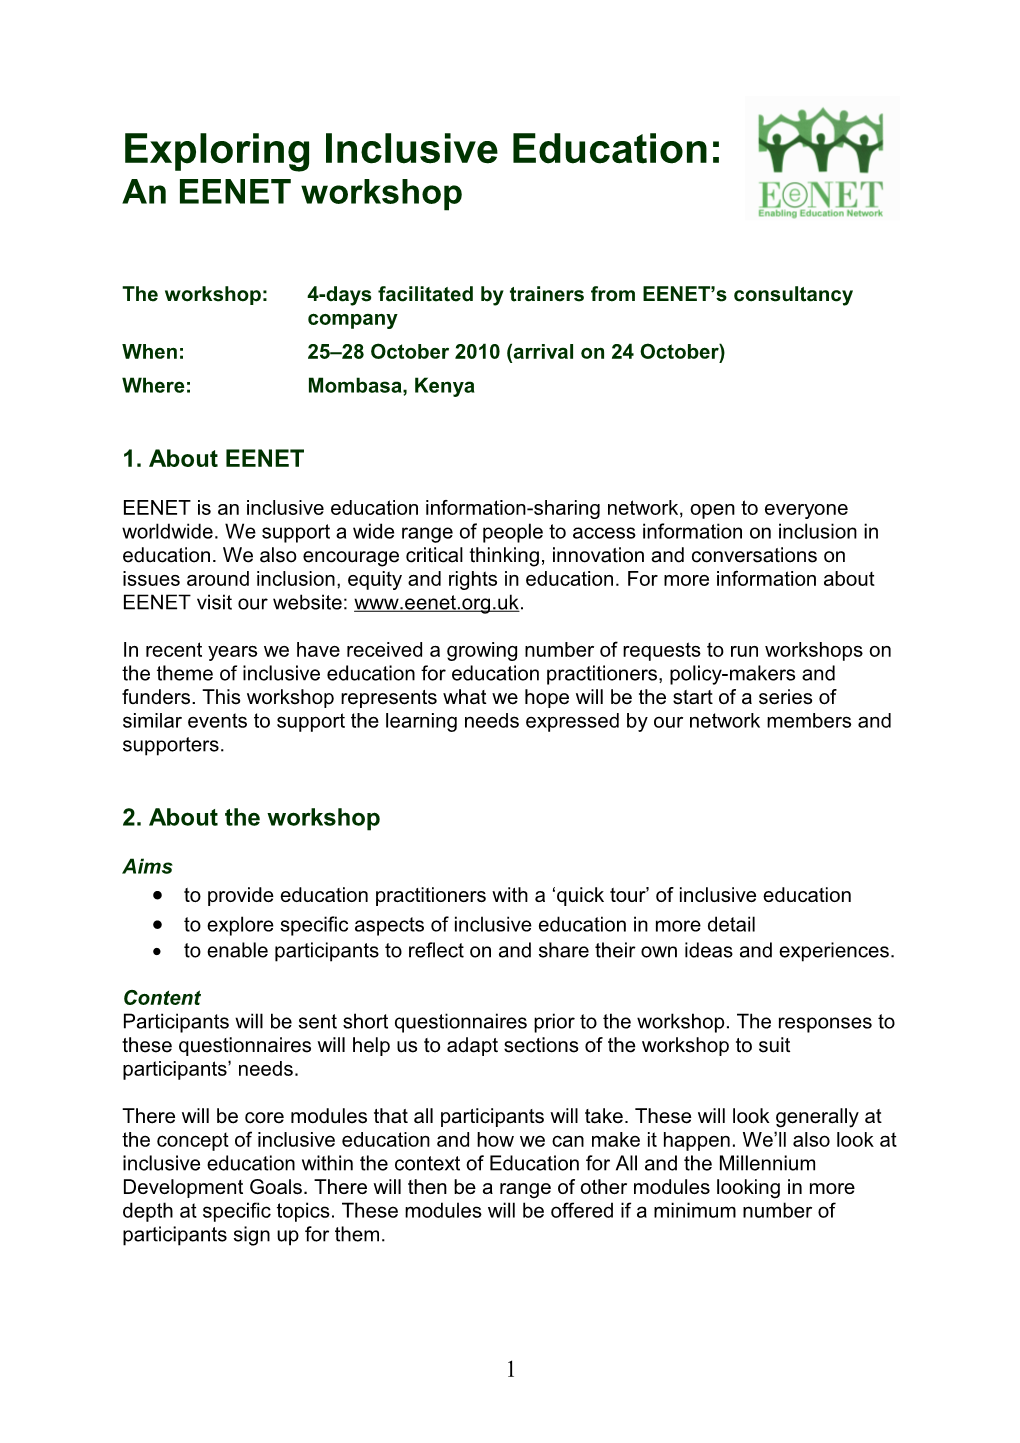 The Workshop: 4-Days Facilitated by Trainers from EENET S Consultancy Company